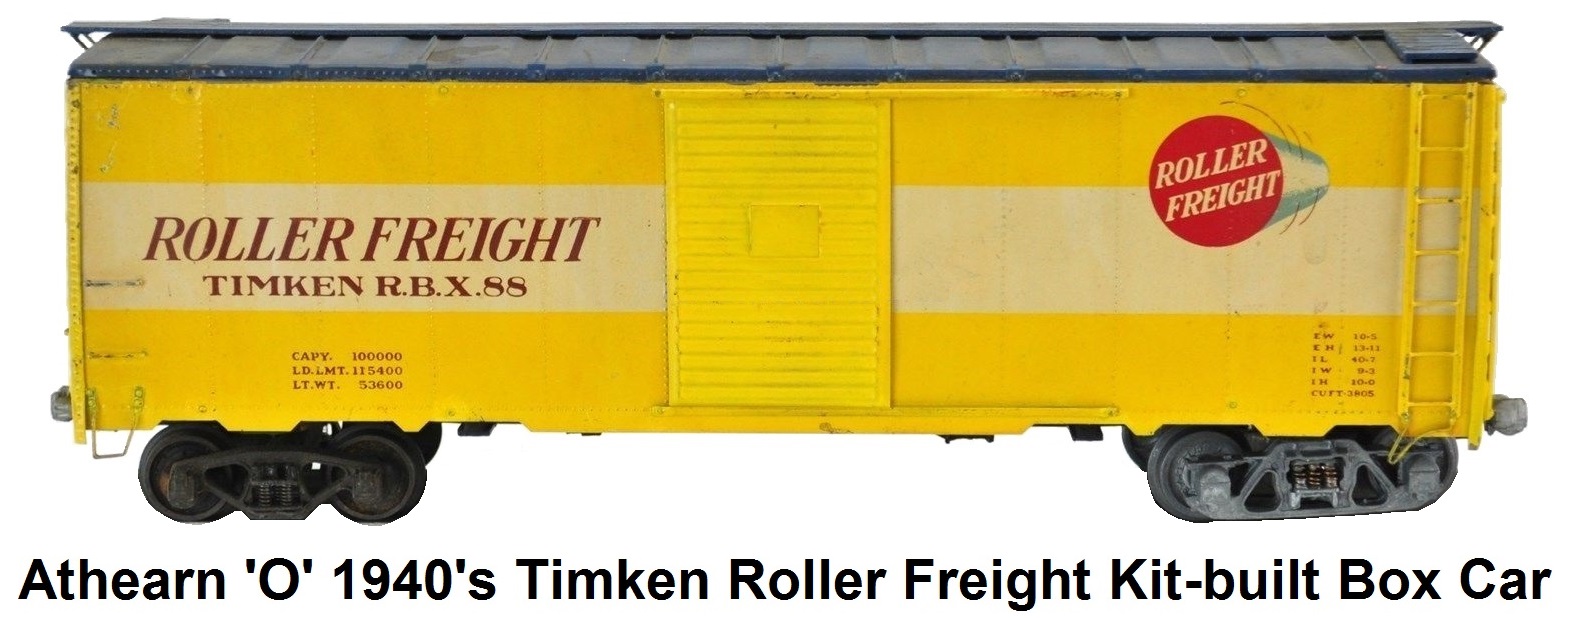 Athearn 'O' scale Timken Roller Freight 1940's Kit-built Wood With Metal Skin Yellow Box Car - Catalog #A181